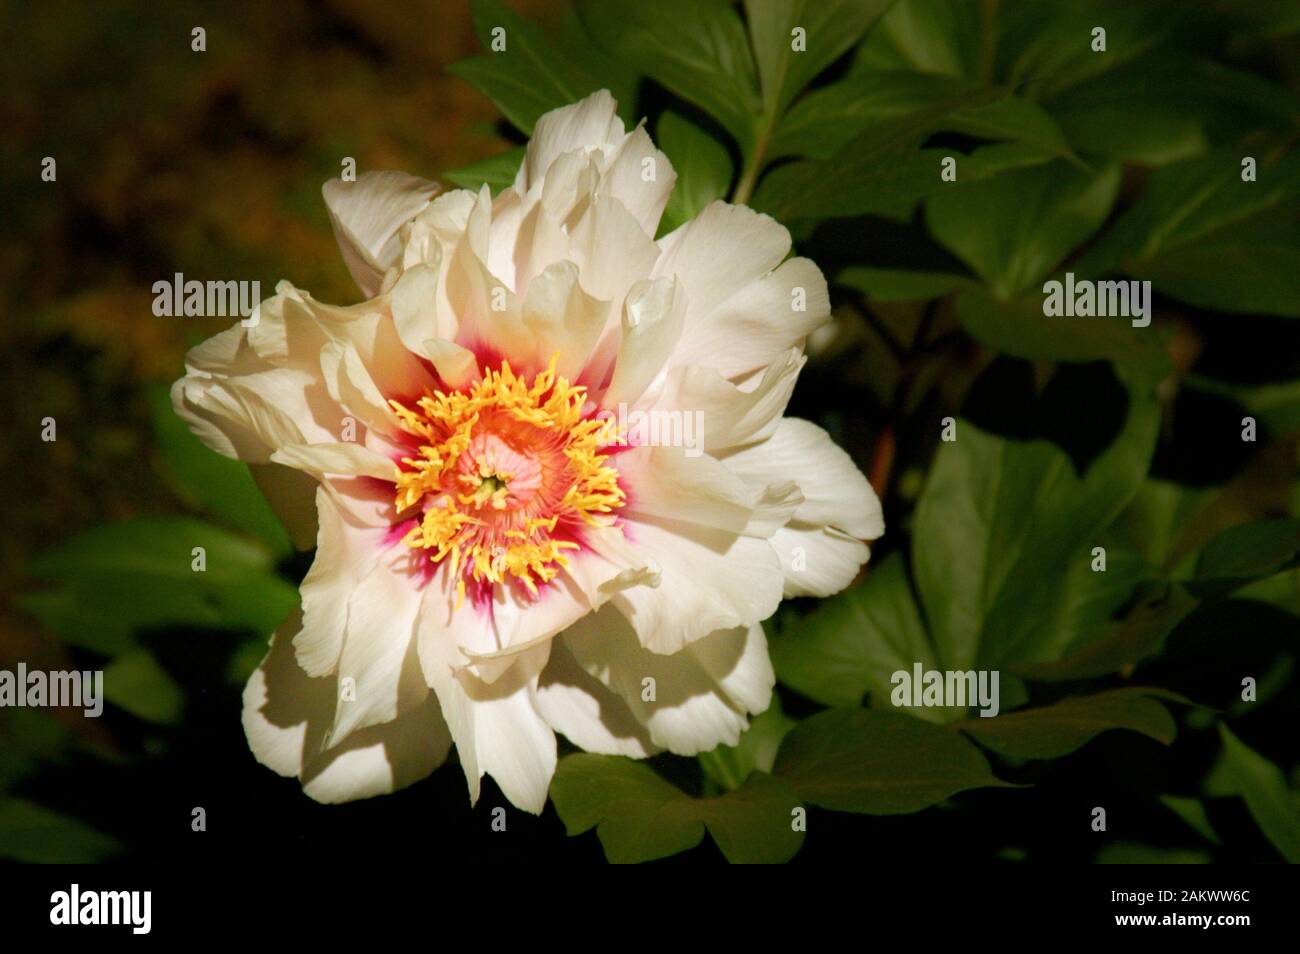 A close up view of a peony pretty white peony blossum off center and good lighting Stock Photo